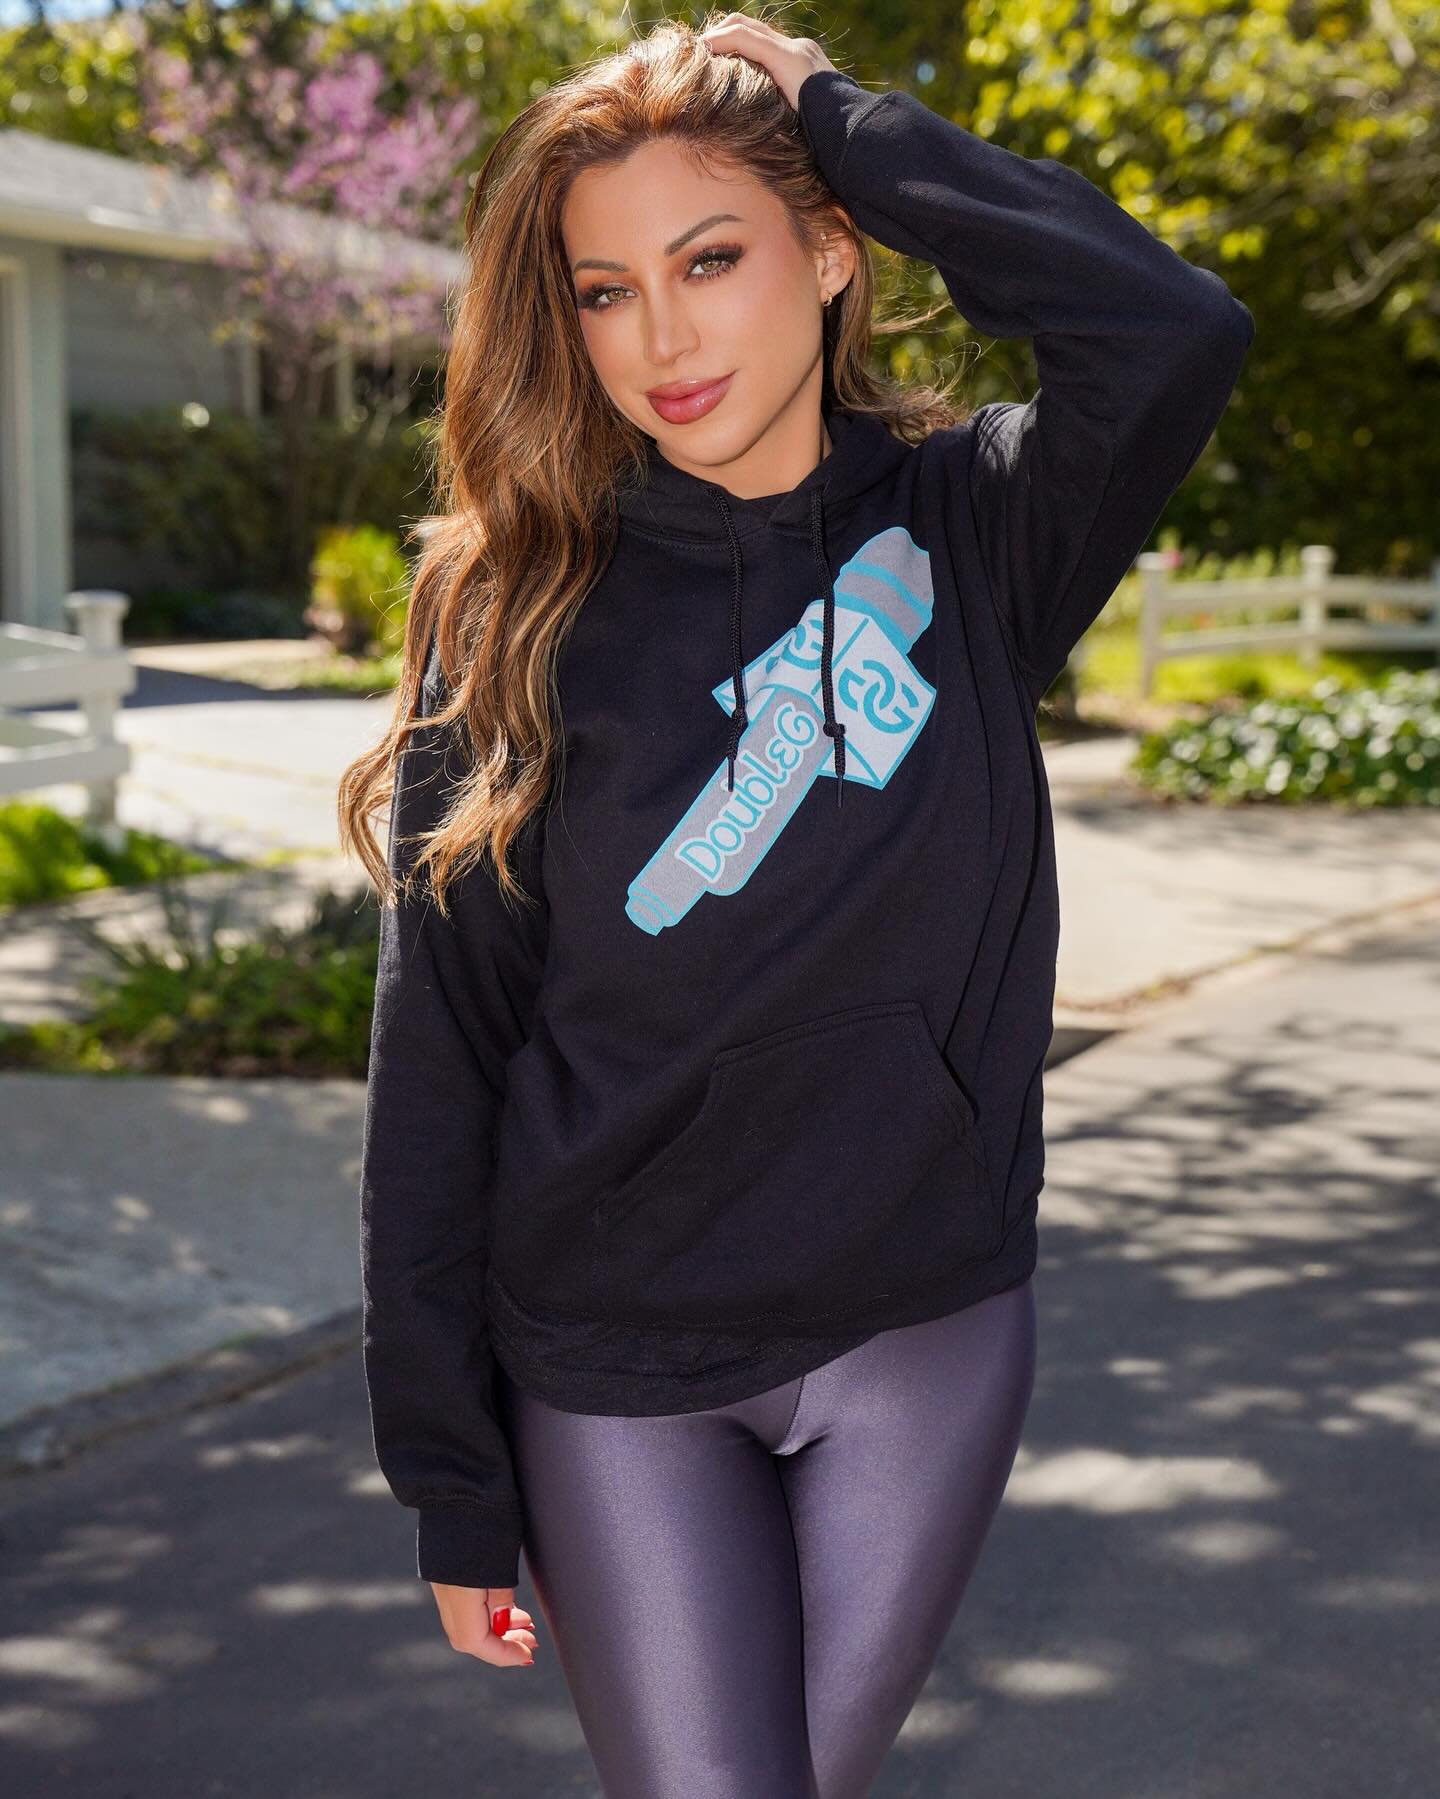 I’m not done yet.

More options for The DoubleG Collection are available now at @millionsdotco!!

Follow the link in my bio to order yours and support your favorite MMA Reporter!

“If you have a question, just ask.” 🎤 

Model: @jessicavaugn